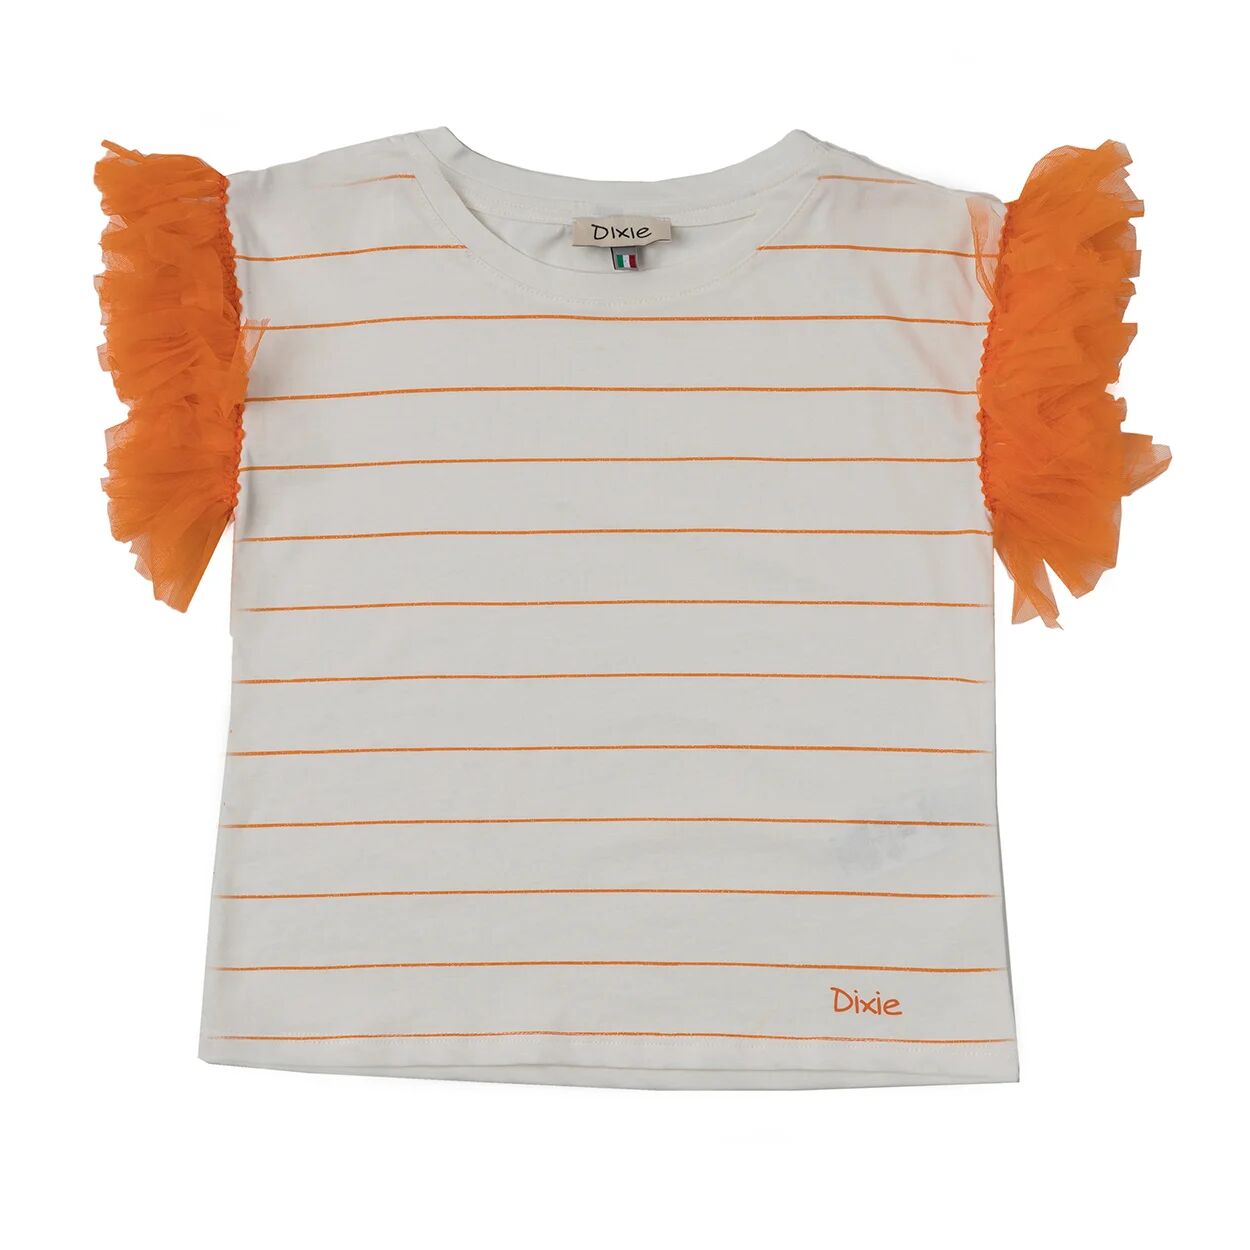 Dixie T-shirt bianca a righe con frappe in tulle sulle maniche